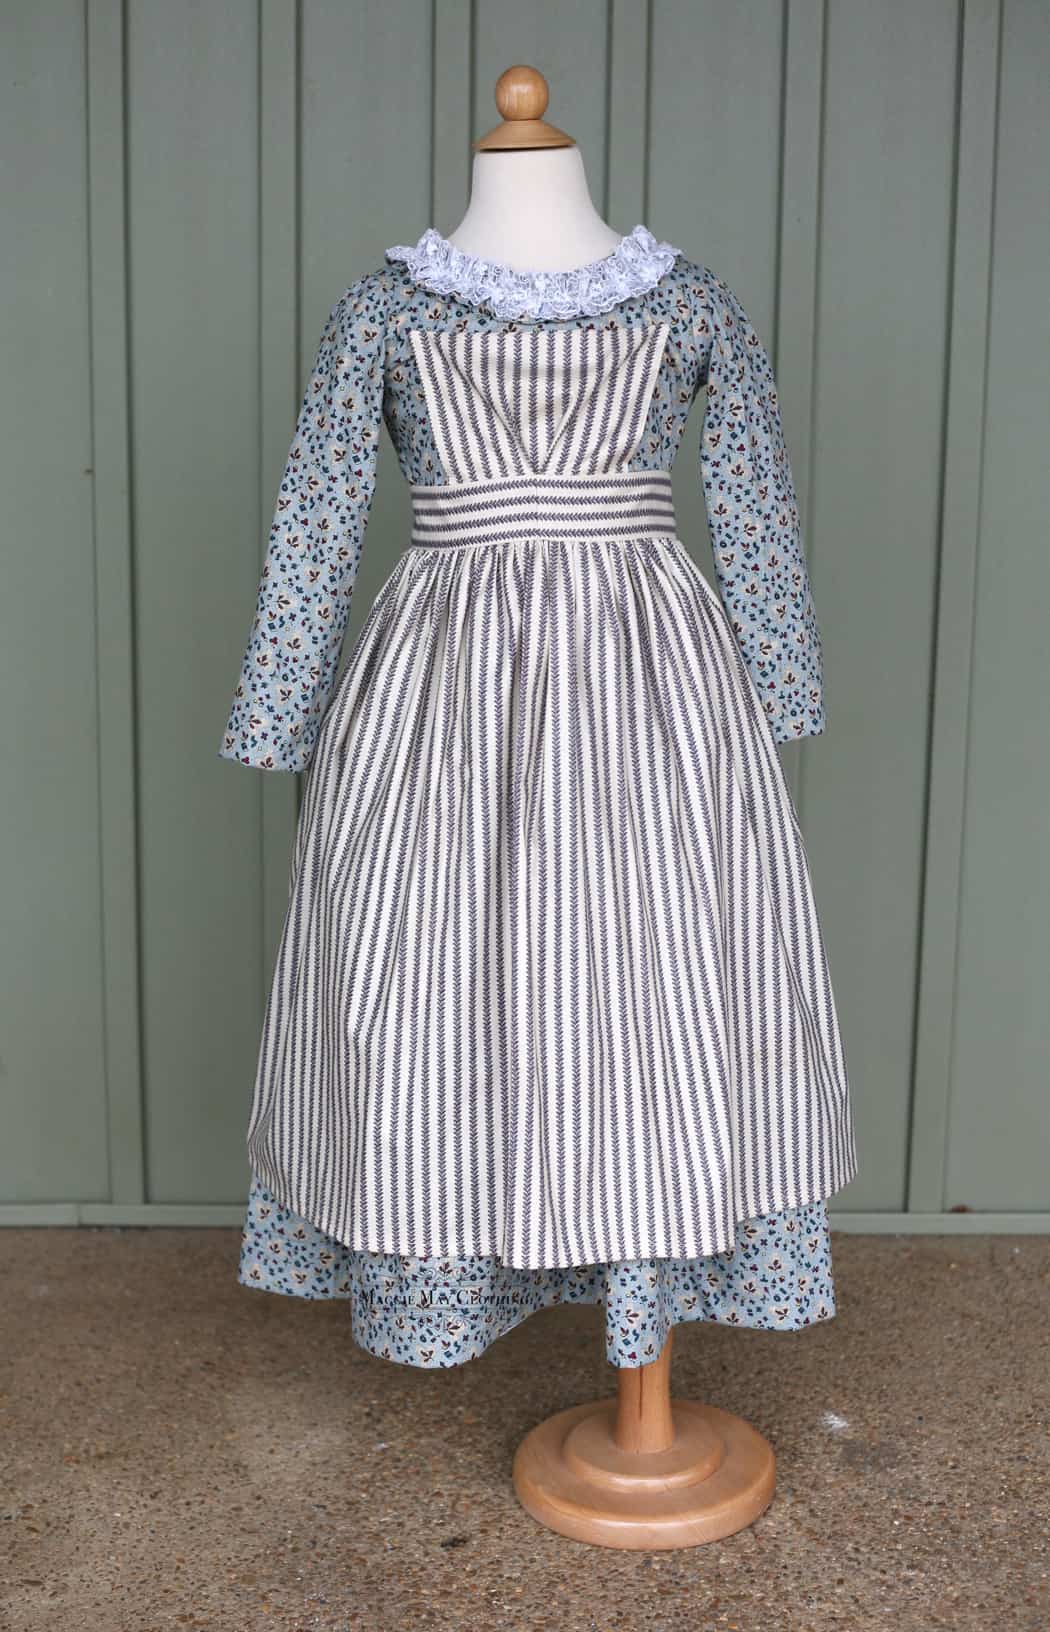 Girl's 1830s-1840s dresses – Maggie May Clothing- Fine Historical Fashion